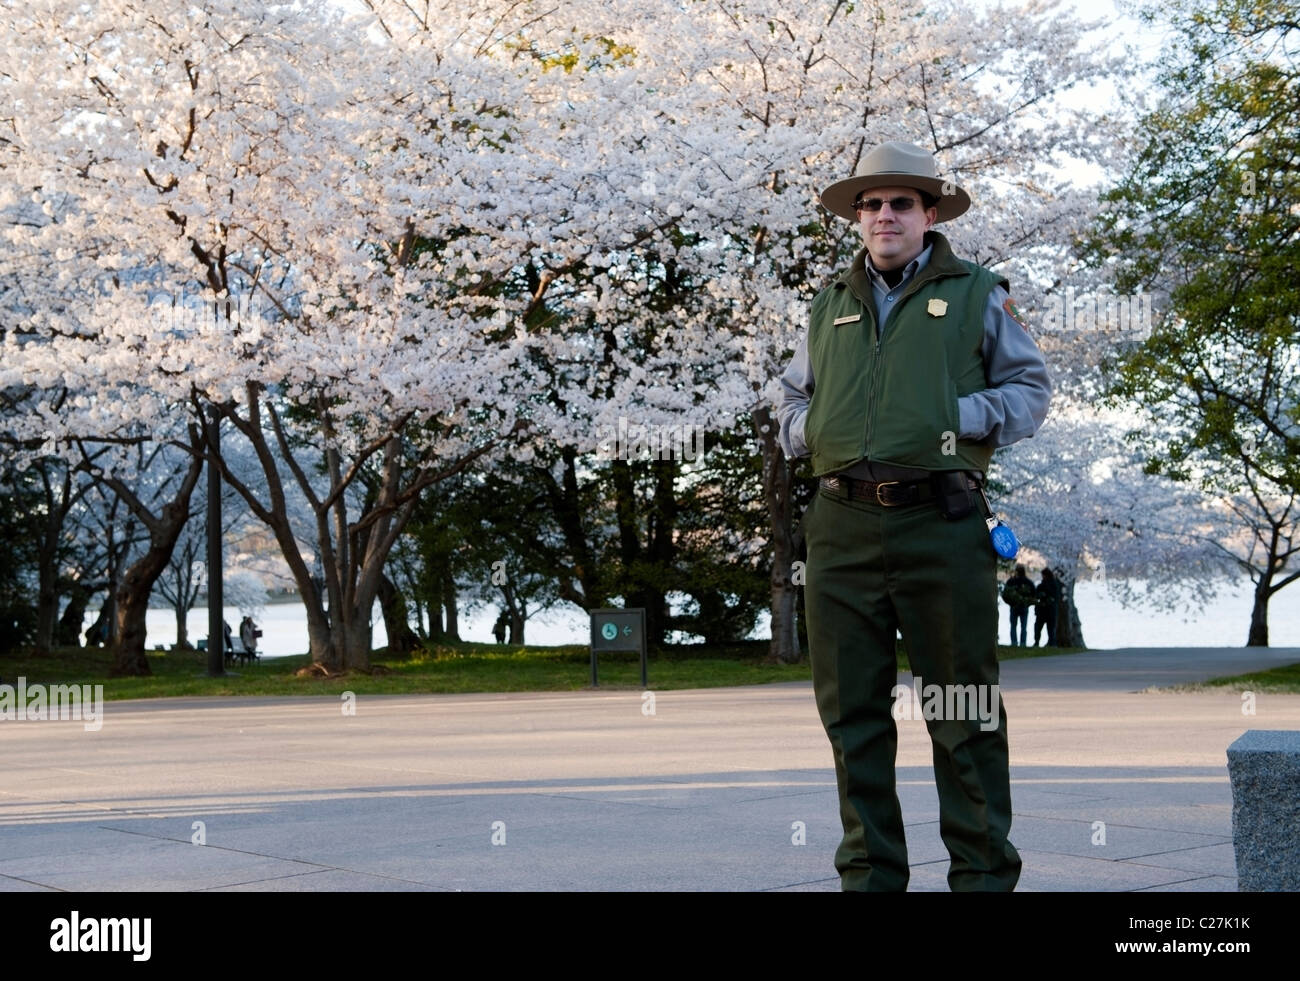 Washington DC, A park ranger poses for a picture during the 2011 Cherry Blossom Festival on the National Mall. Stock Photo